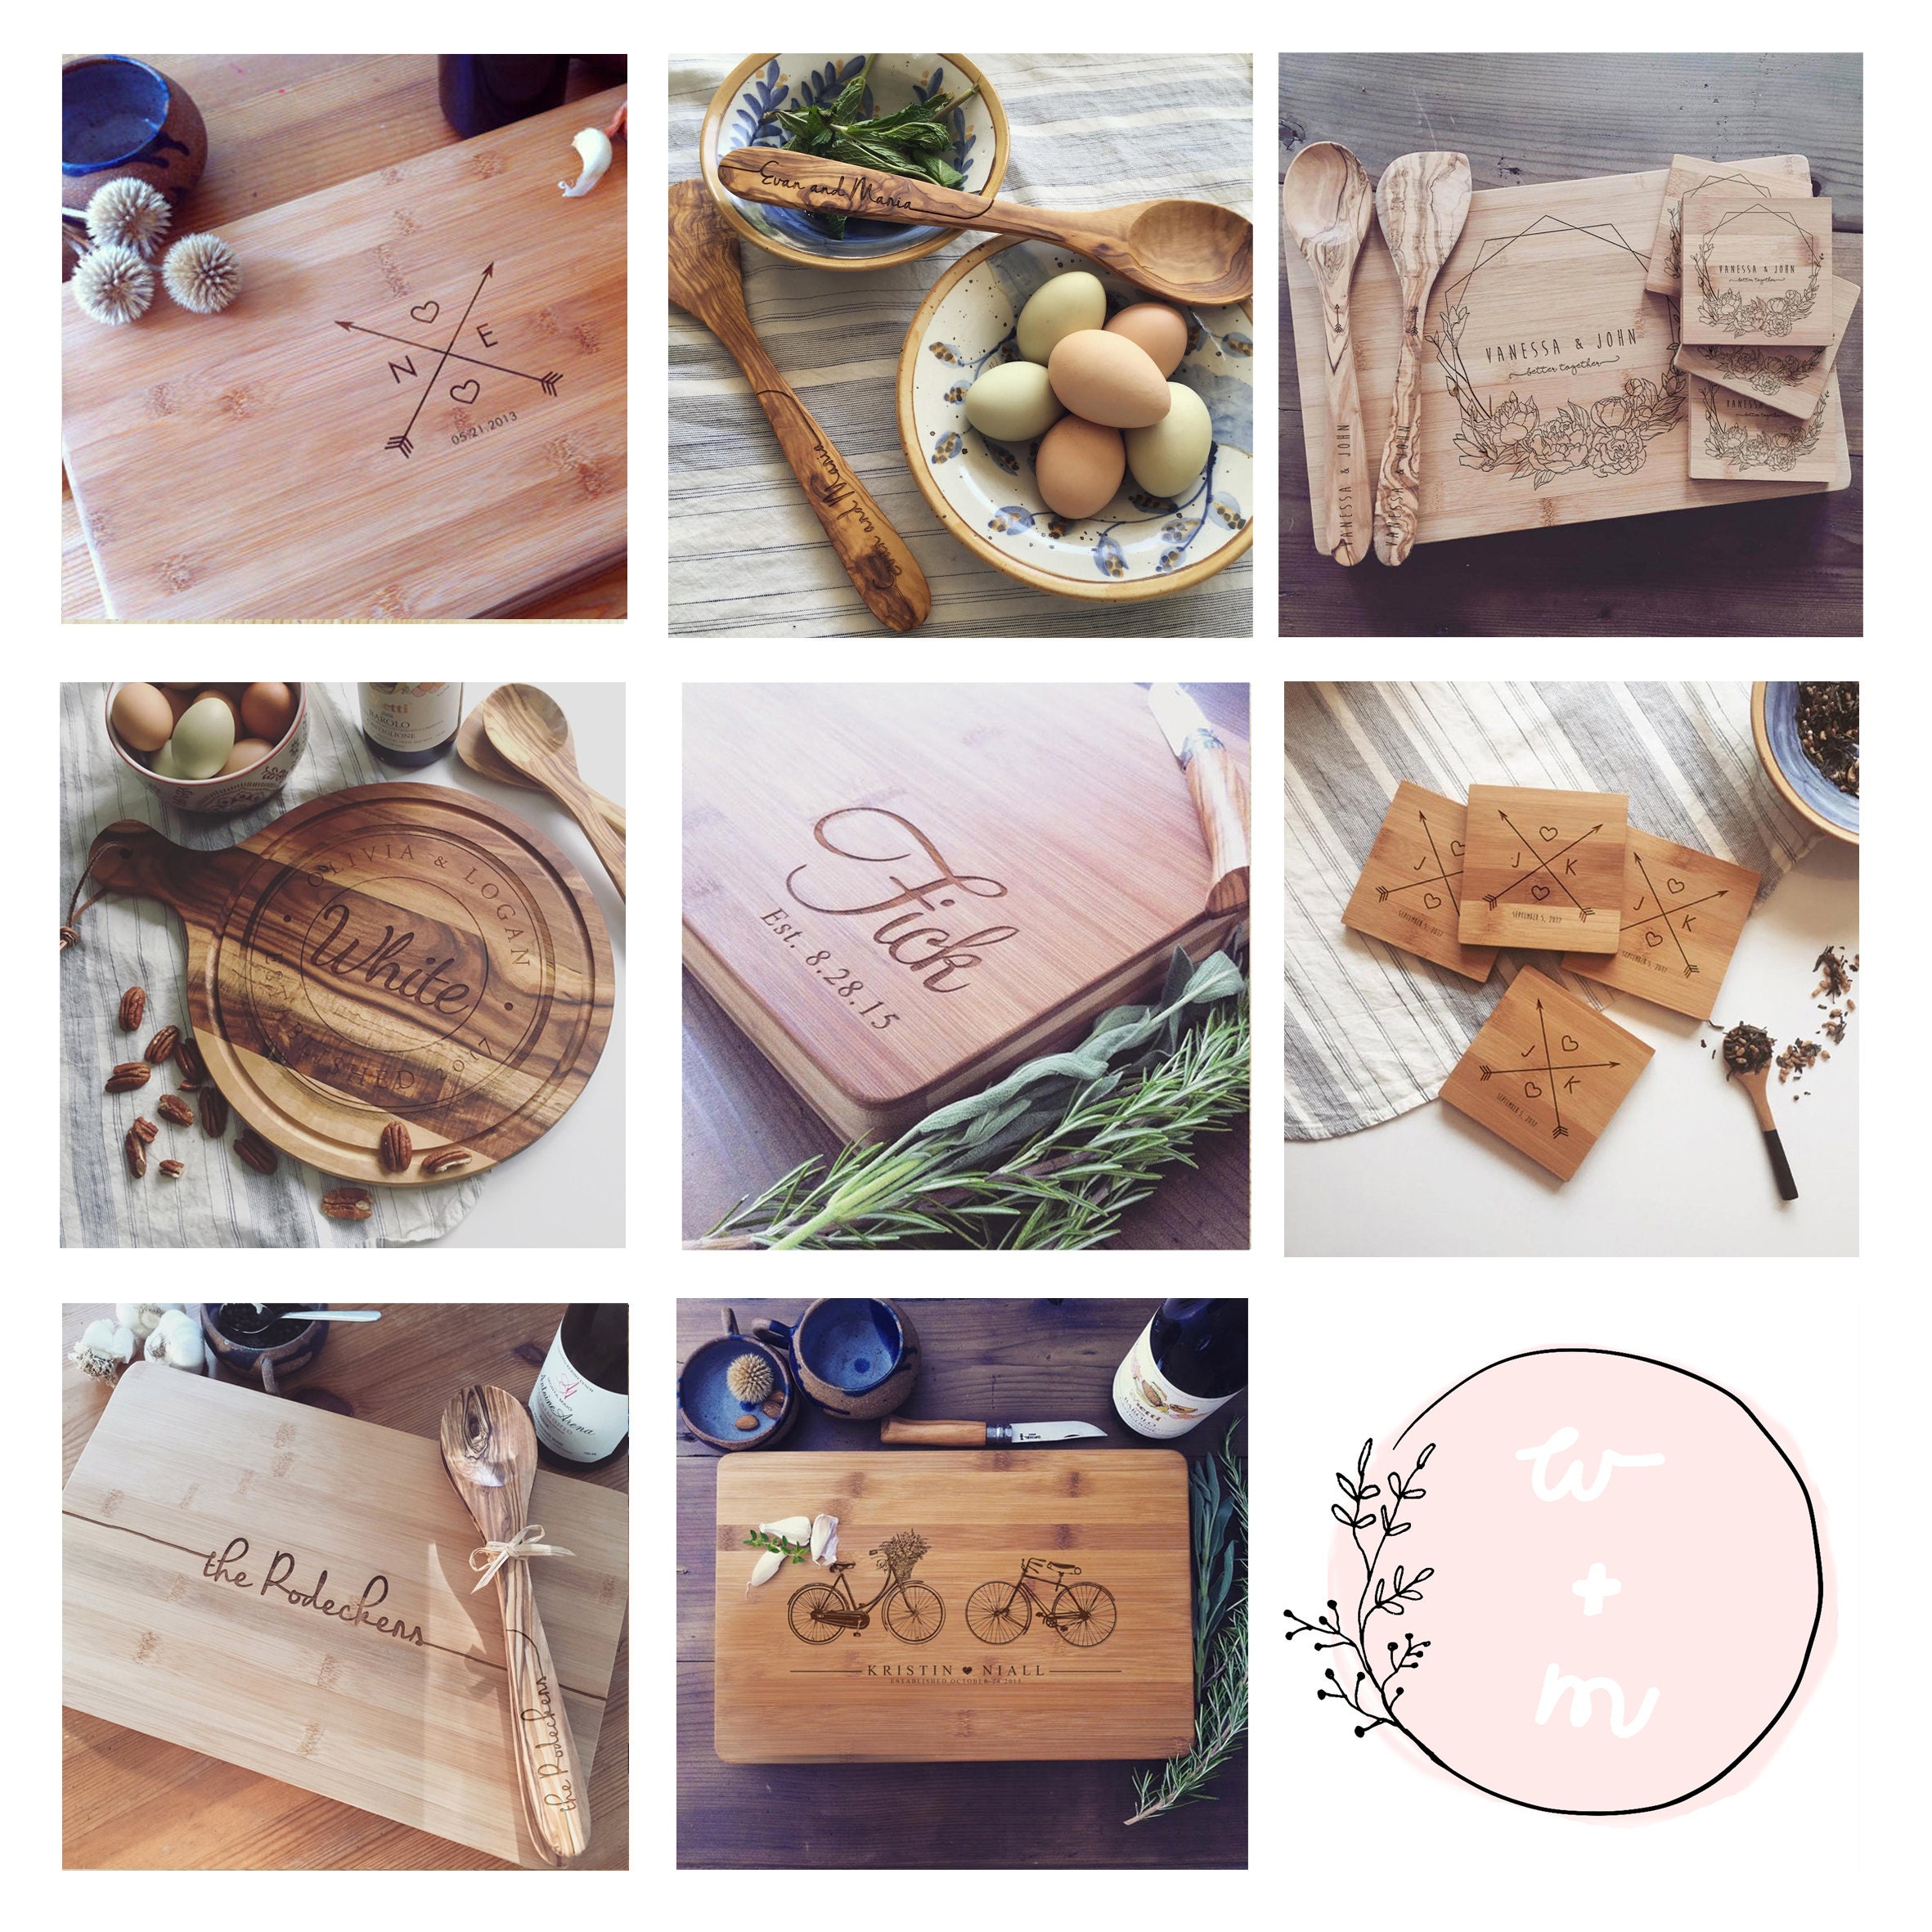 Spalted American Elm Footed Cutting Board - Unique Personalized Wedding  Gift- Cottage Chic Wood Cutting Board - 728 — Rusticcraft Designs